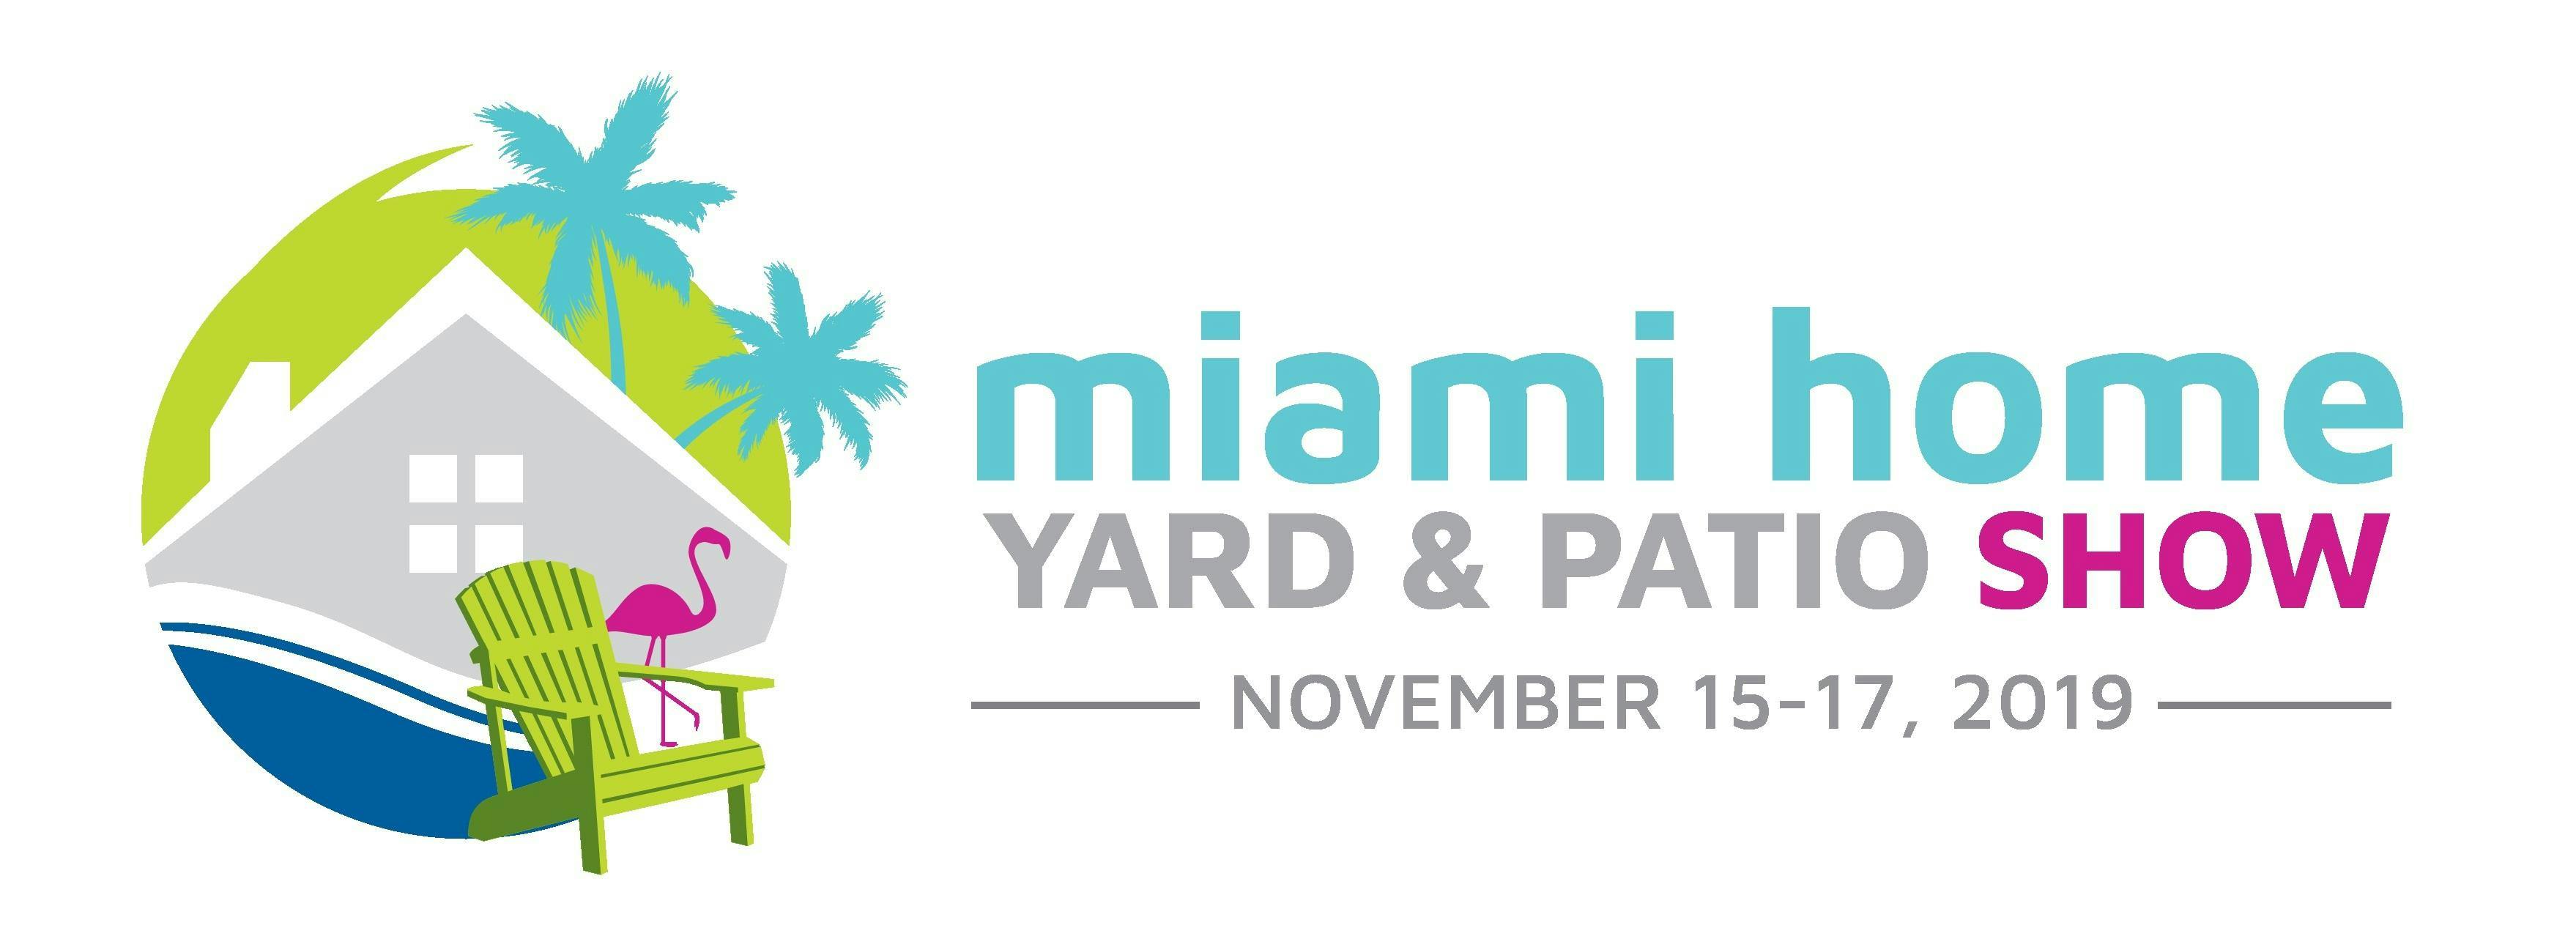 DESIGNERS DRIVE at The Miami Home Yard & Patio Show